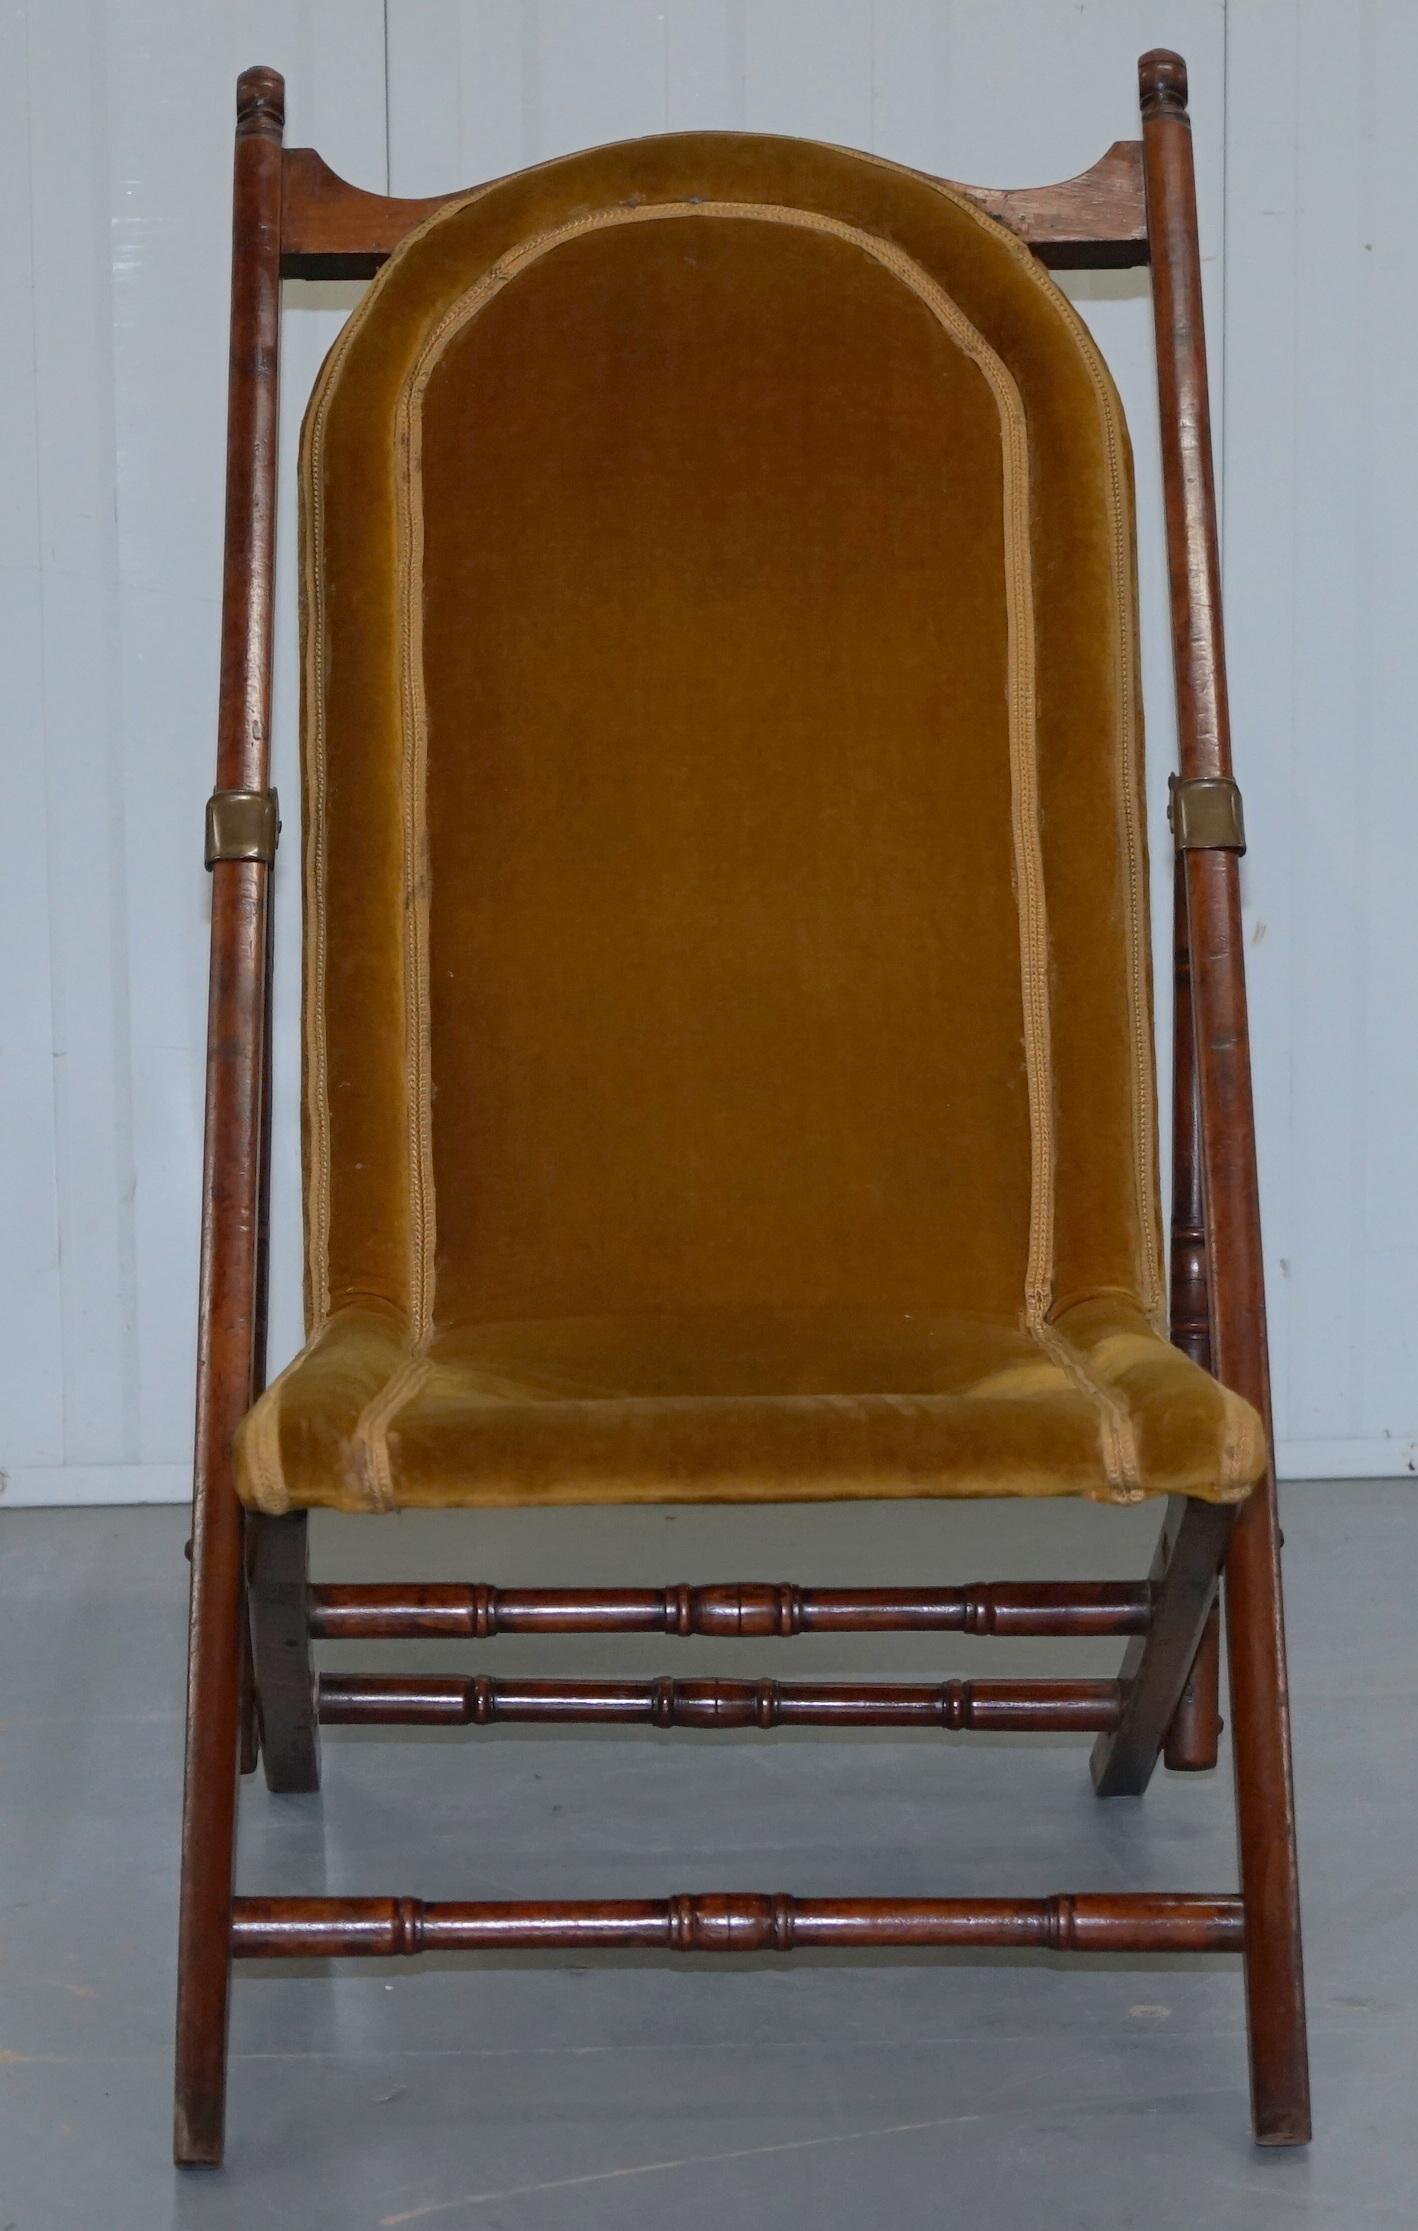 We are delighted to offer for sale this lovely original handmade in England Victorian circa 1880 Military Campaign folding armchair

A very comfortable and well made piece, this is the ideal reading or NAP chair, it has such a lovely seating